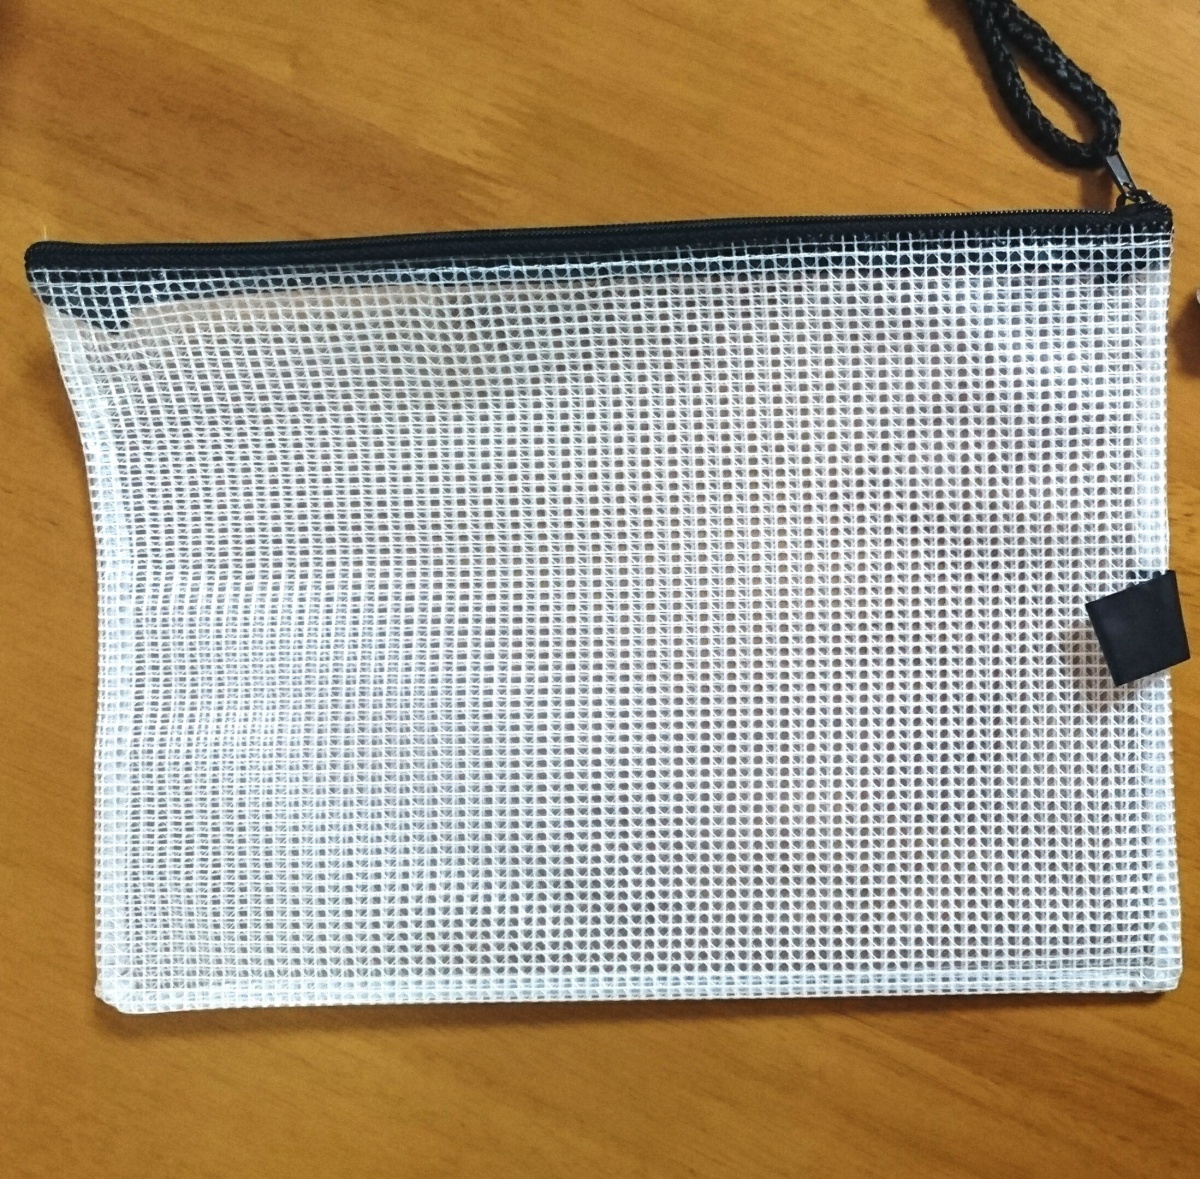 12. Waterproof Pouch for Documents & Cash